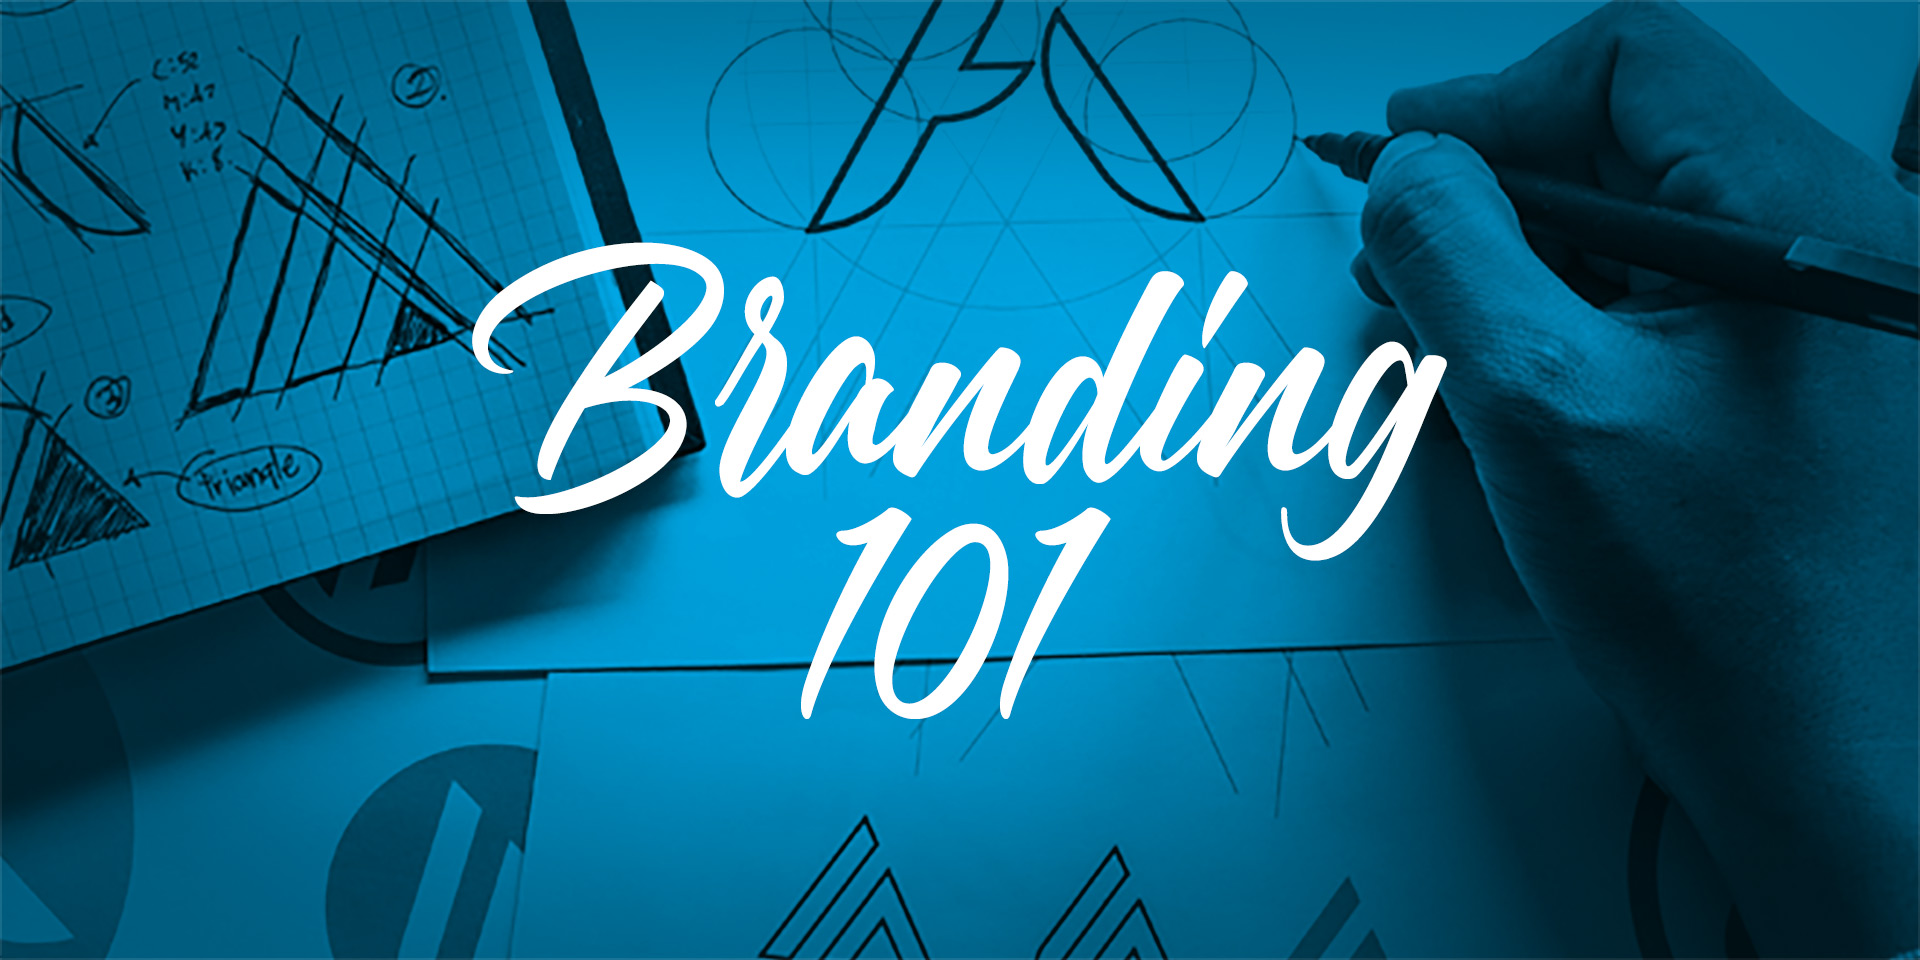 A Great Logo Will Have These Top 6 Characteristics: